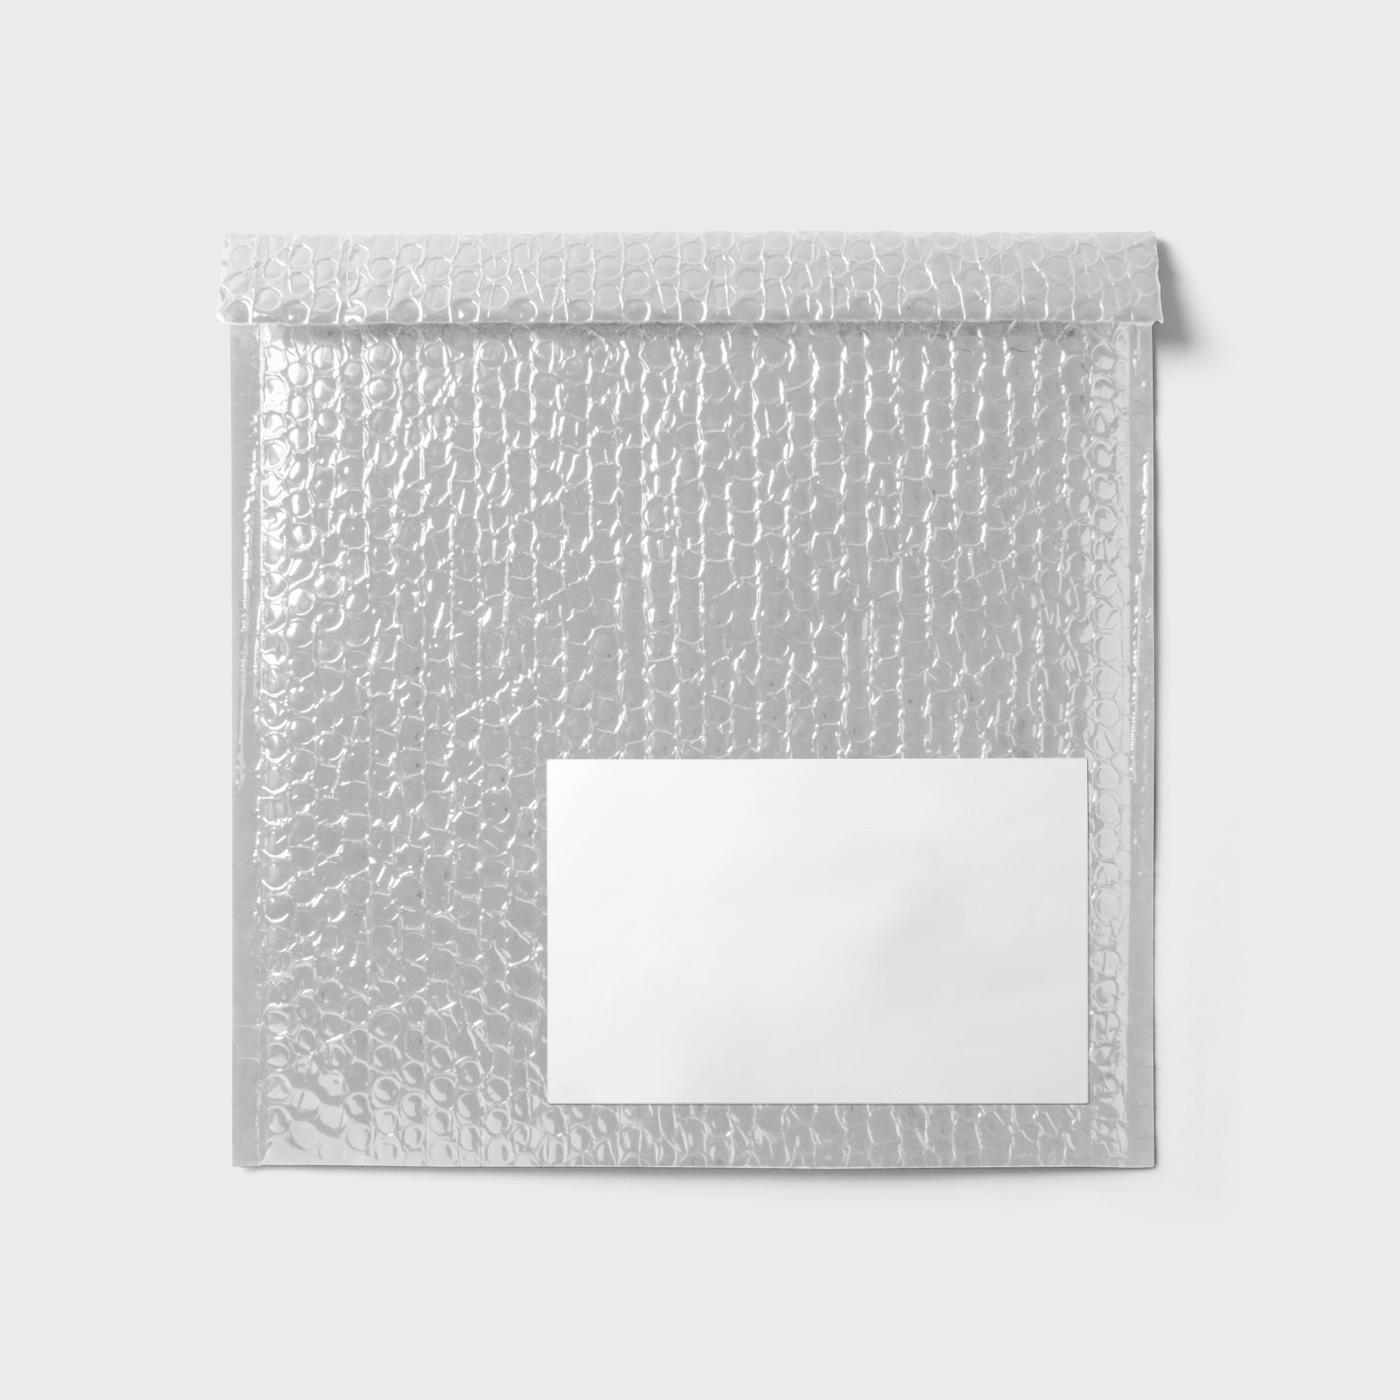 Front View of Square Bubble Envelope Mockup FREE PSD